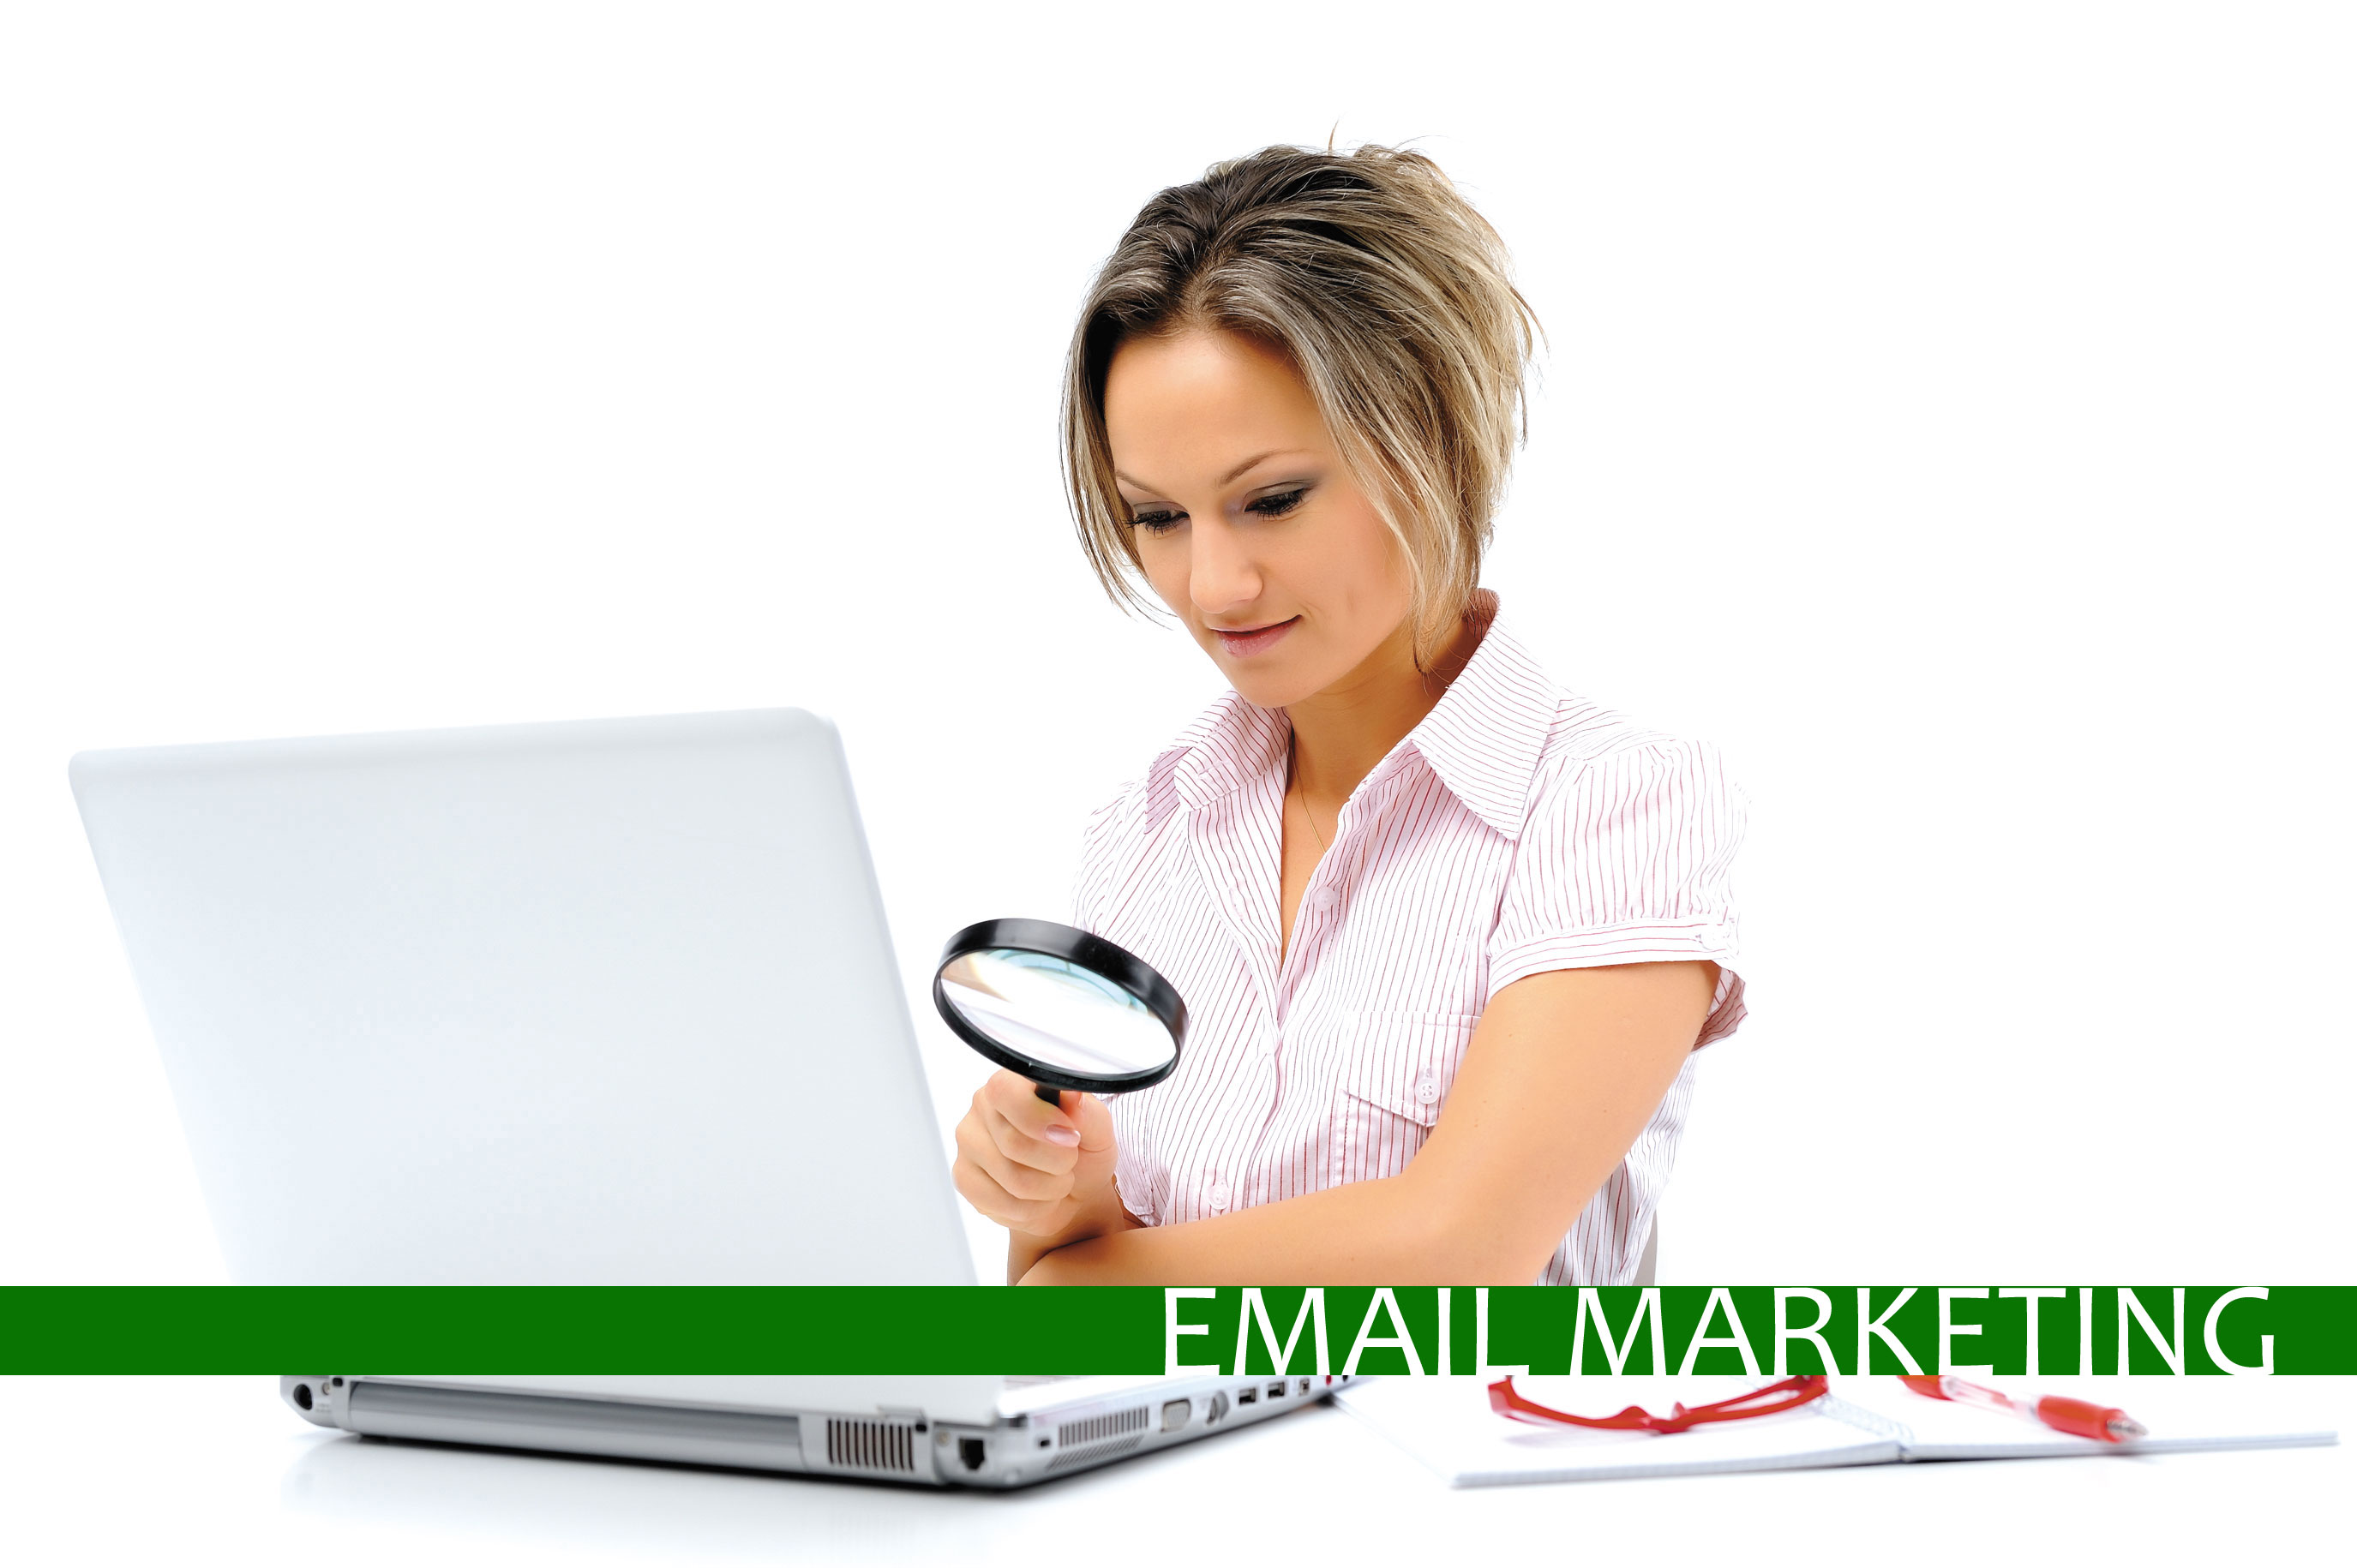 Contractor and Email Marketing Tips improveit360